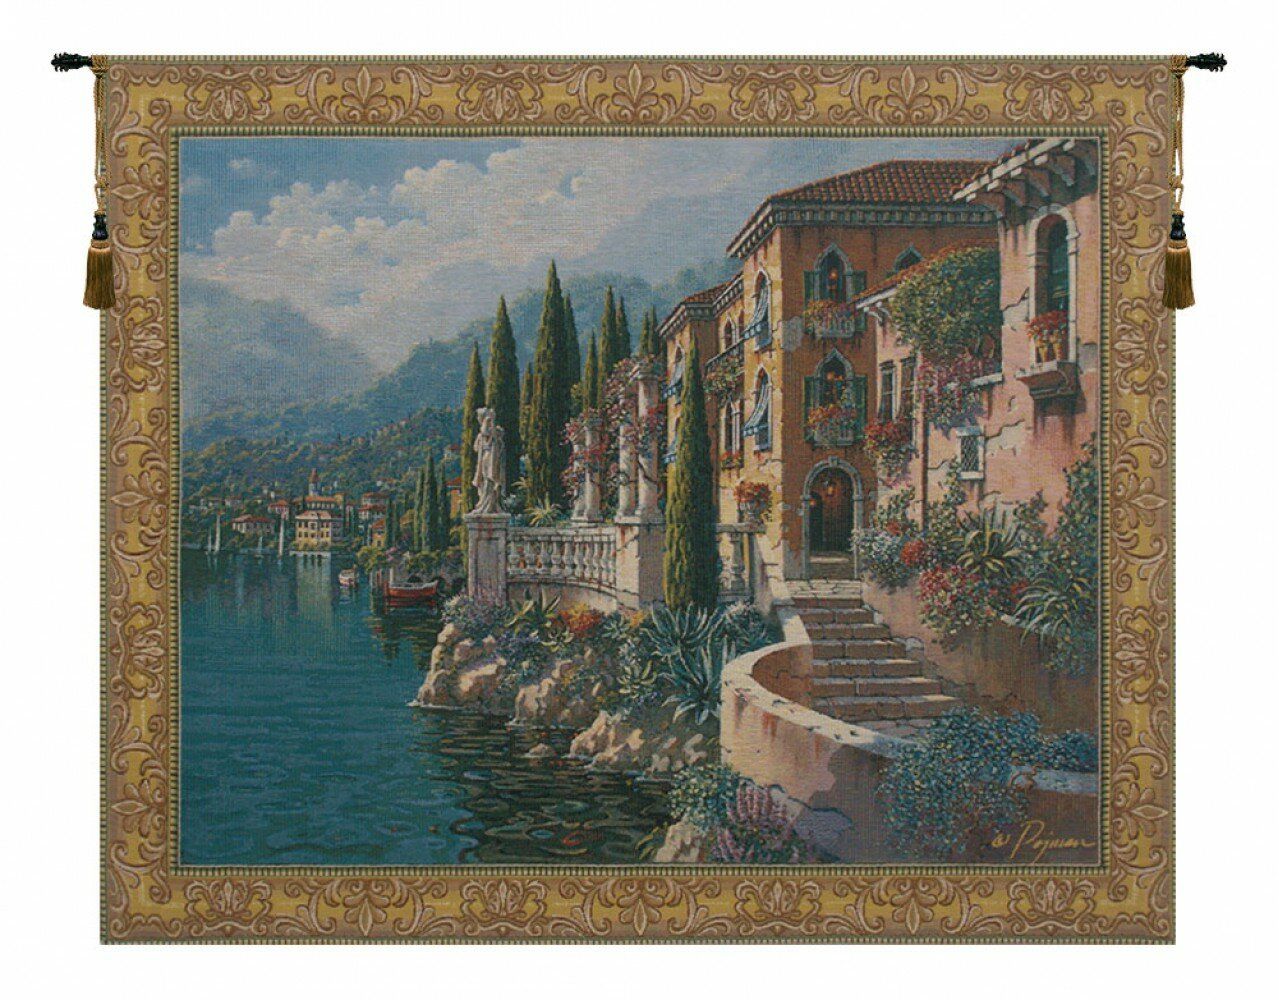 Morning Reflectionsrobert Pejman Flanders Tapestry Within Best And Newest Blended Fabric Morning Reflections By Robert Pejman Flanders Tapestries (View 1 of 8)